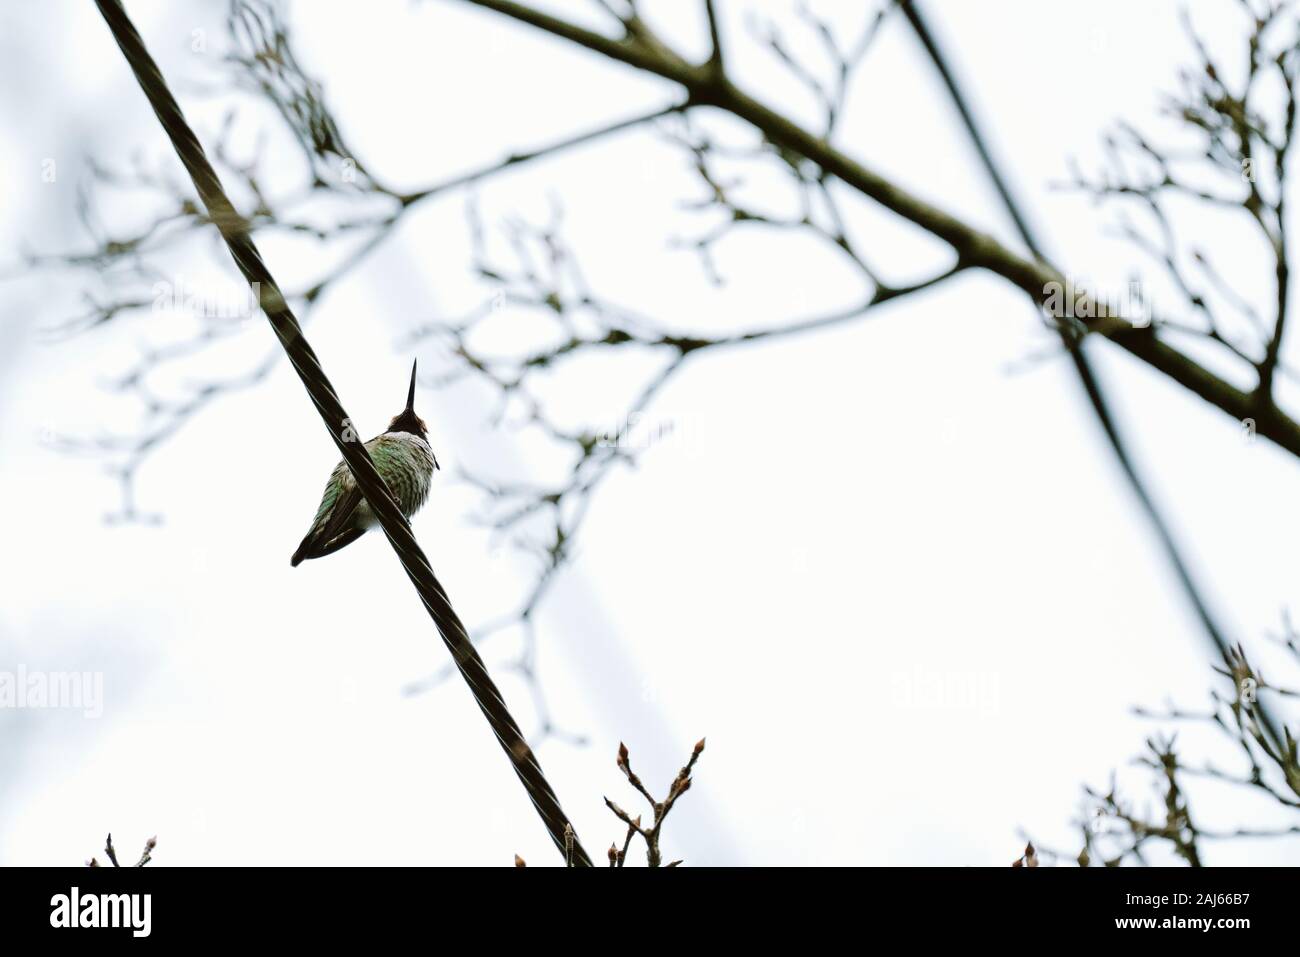 View from below of an Anna's Hummingbird sitting on a wire Stock Photo